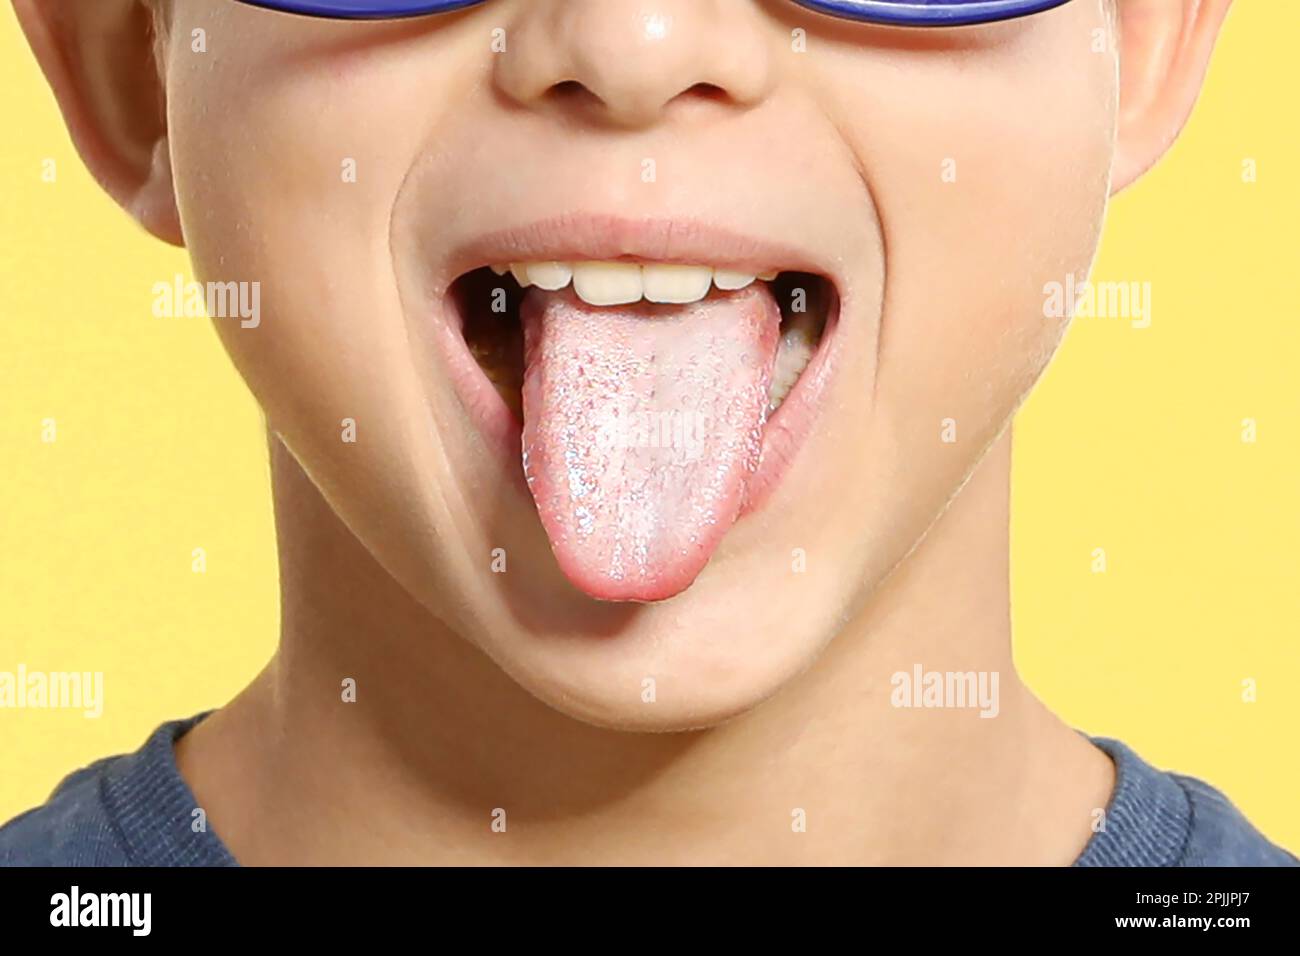 Boy showing tongue with white patches on yellow background, closeup. Oral candidiasis (thrush) disease Stock Photo